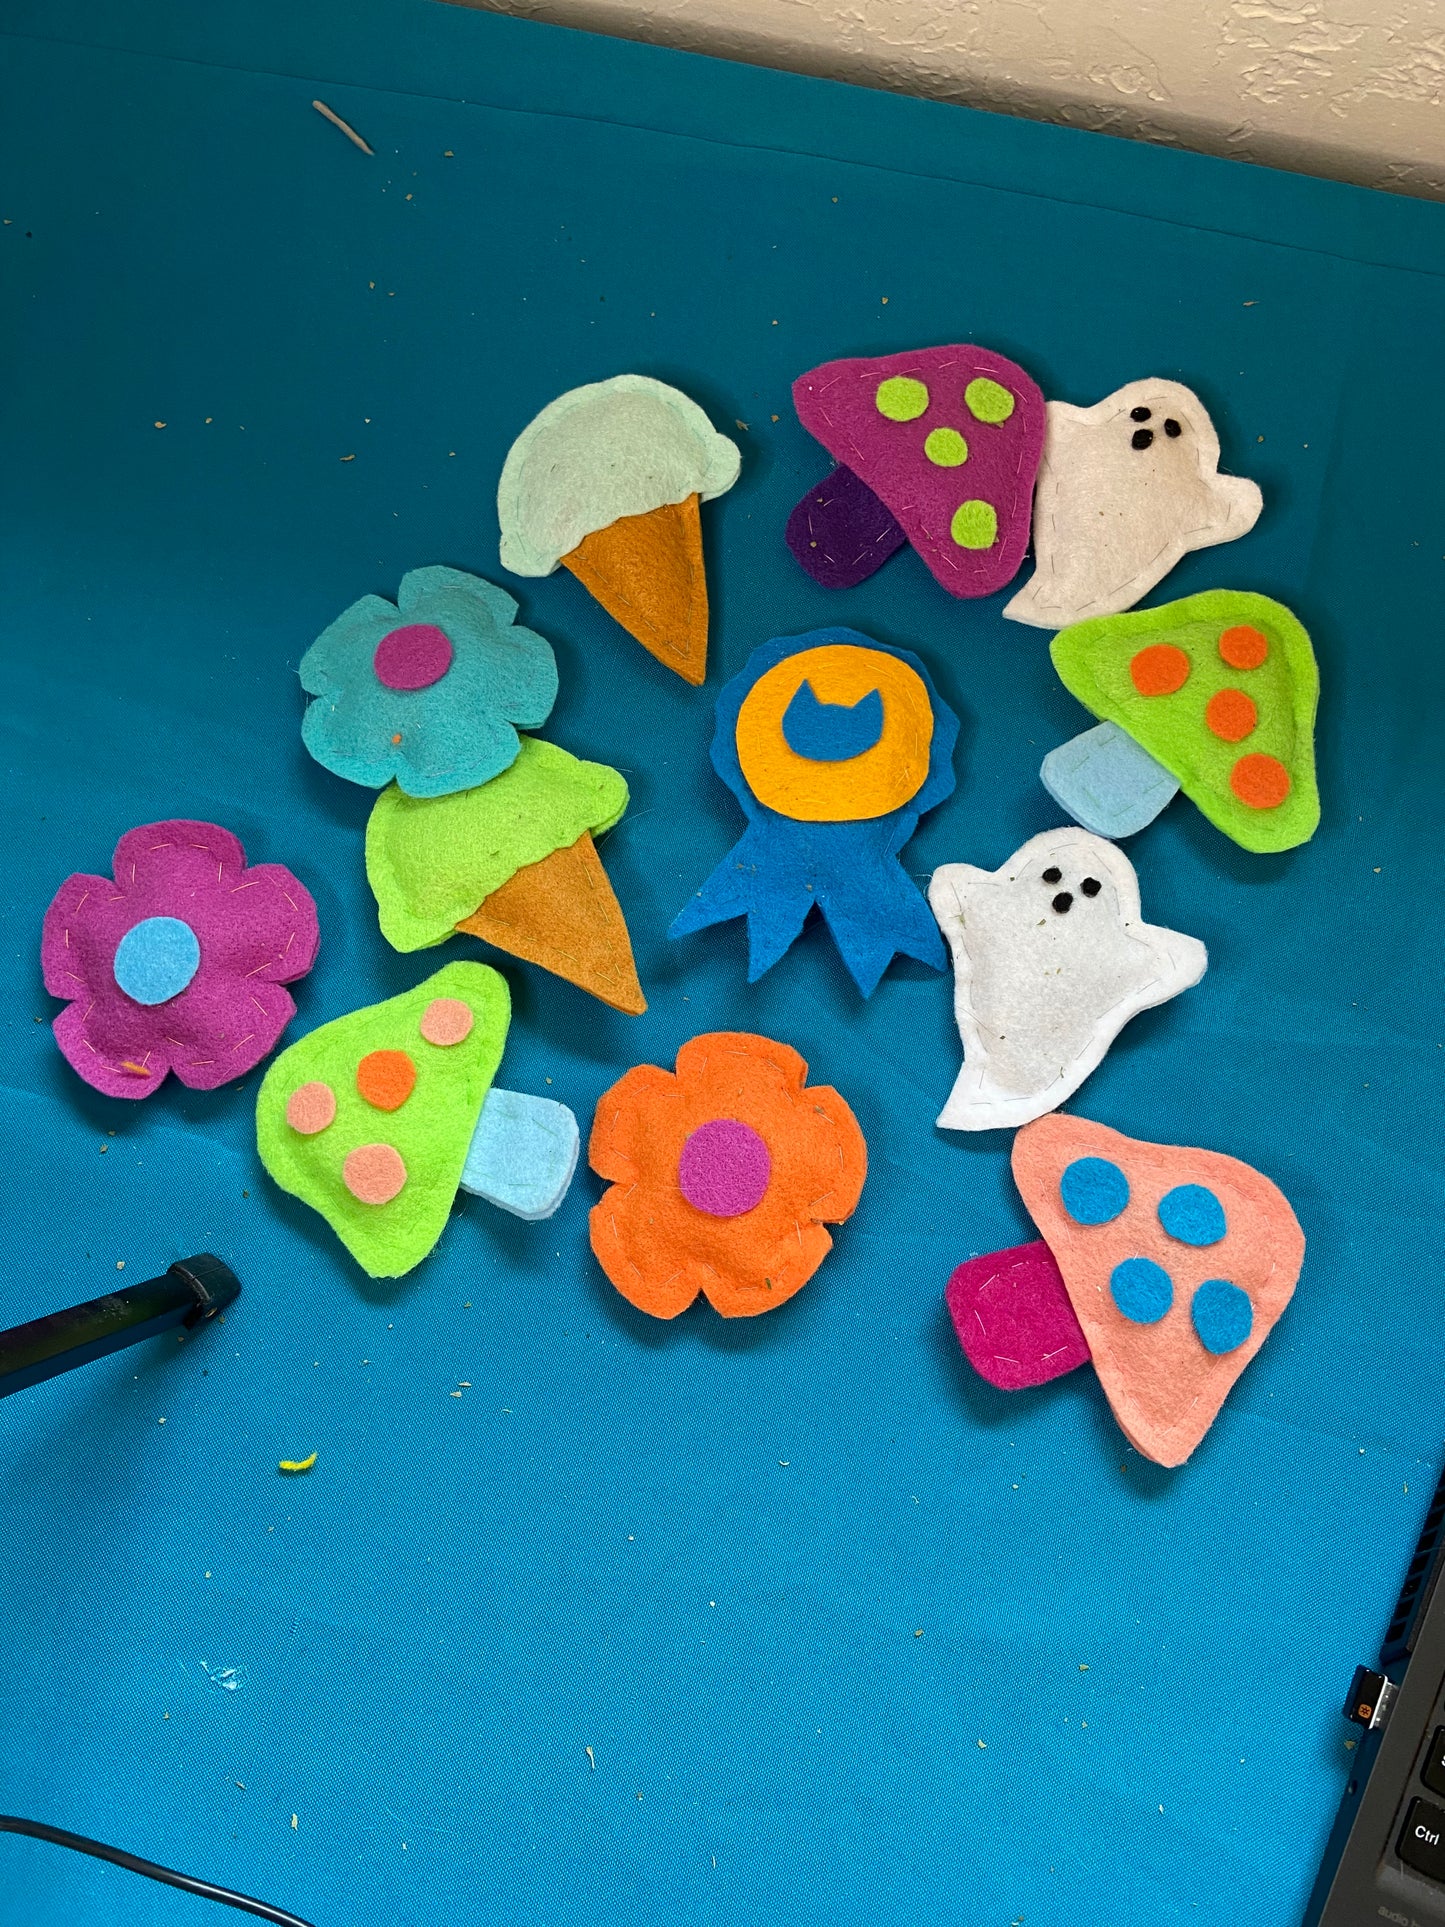 A collection of cat toys for sale. Toys are made of felt, there are ghosts, mushrooms in various colors, ice cream cones, flowers and an award ribbon.